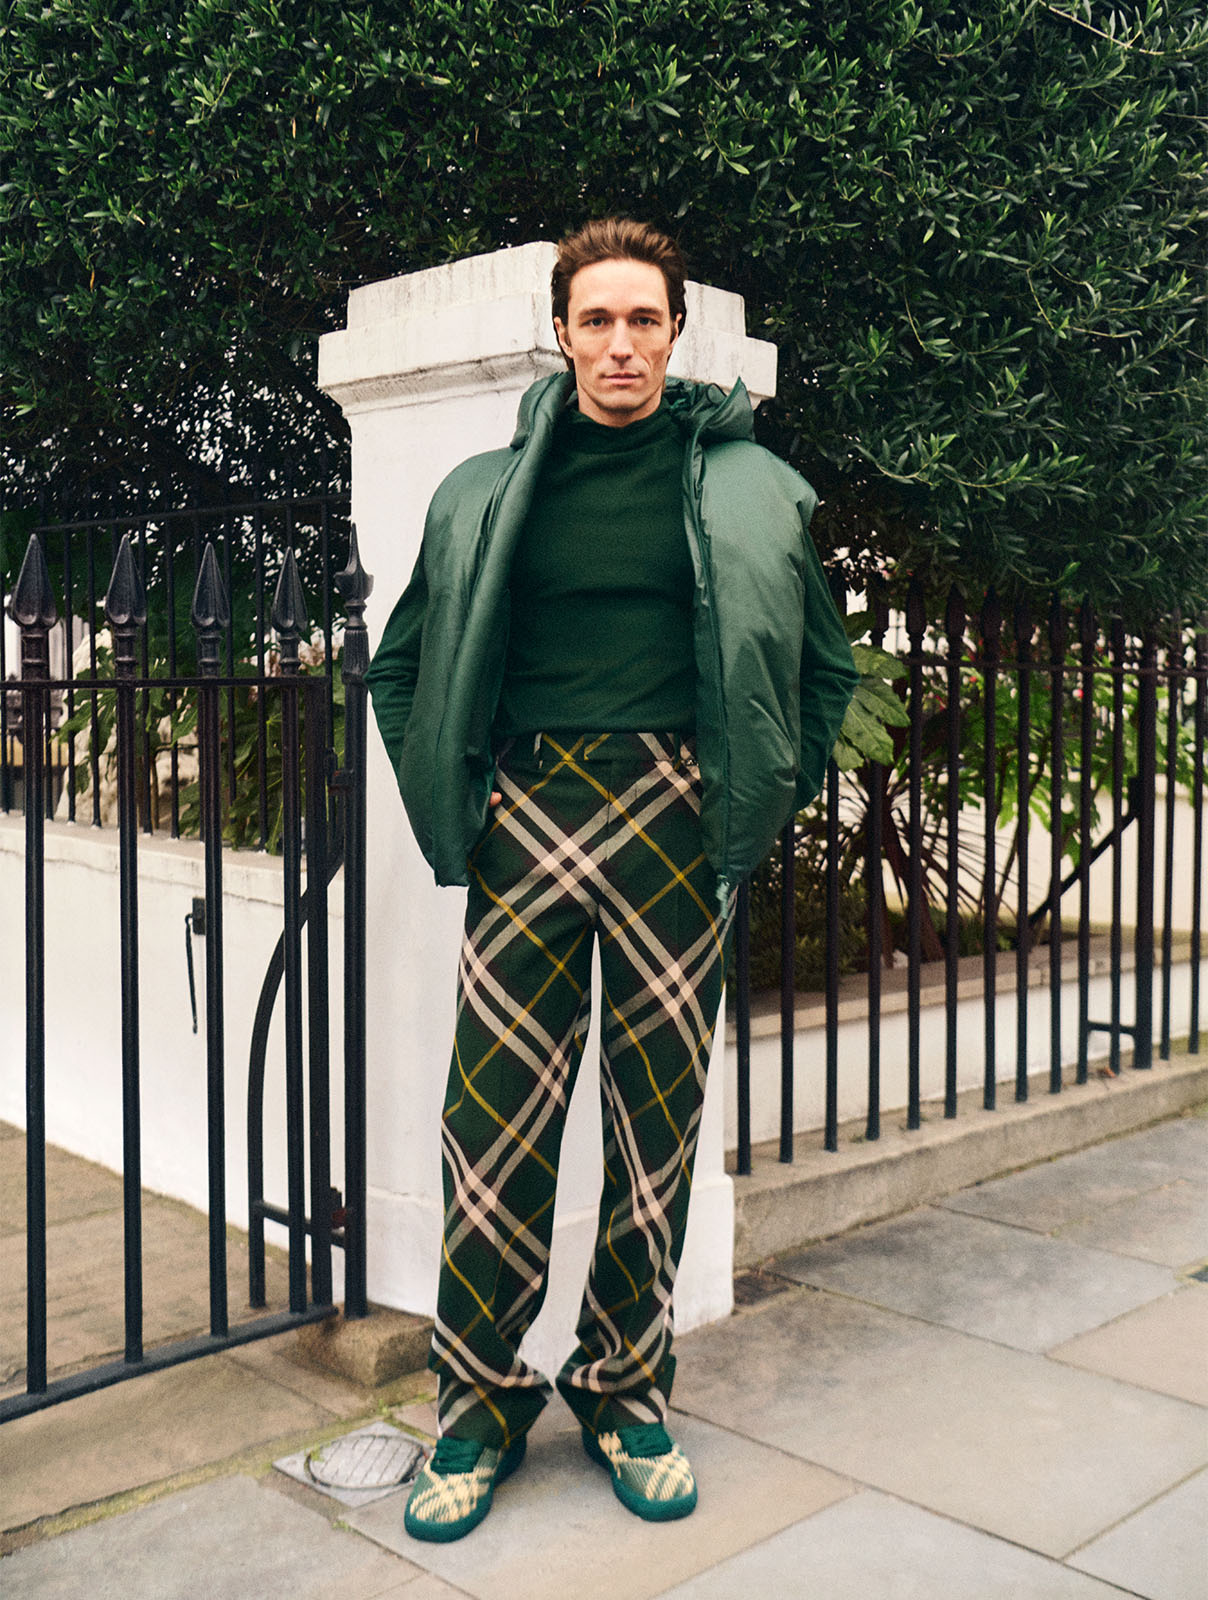 A male model wears a green Burberry puffer jacket and Burberry check trousers